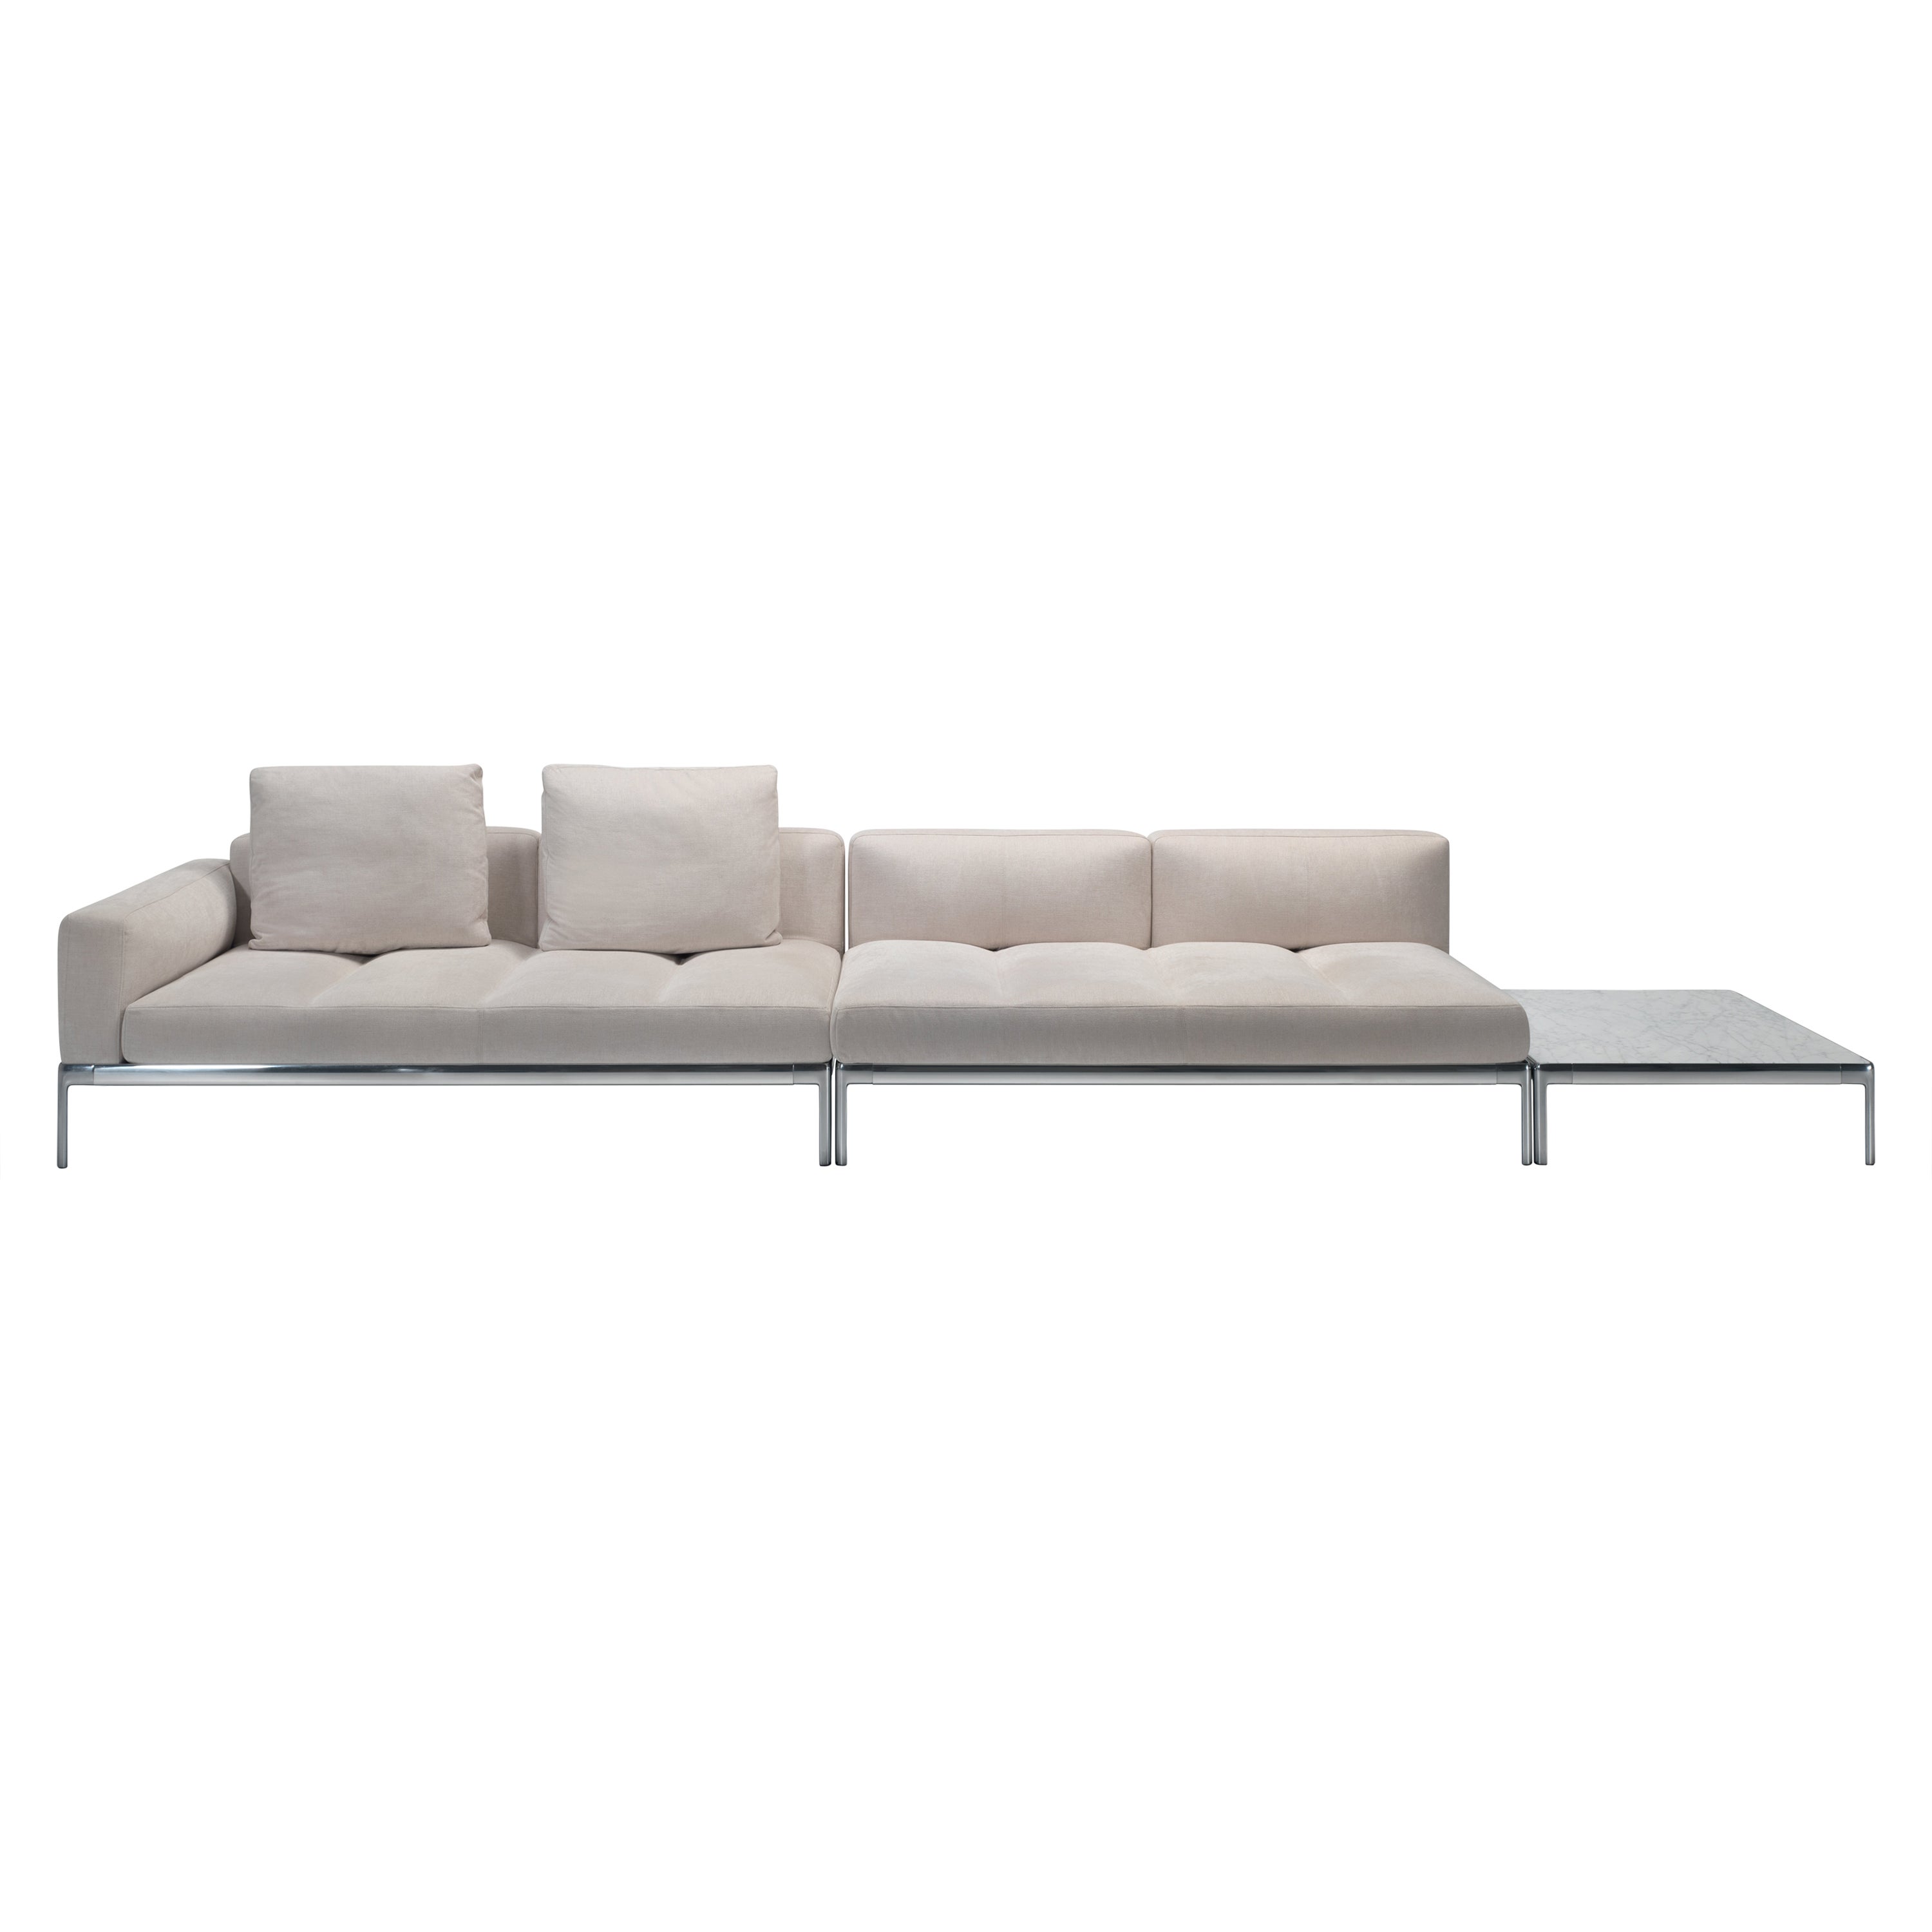 Alias AluZen Modular Sofa & Low Table in Upholstery with Polished Aluminum Frame For Sale